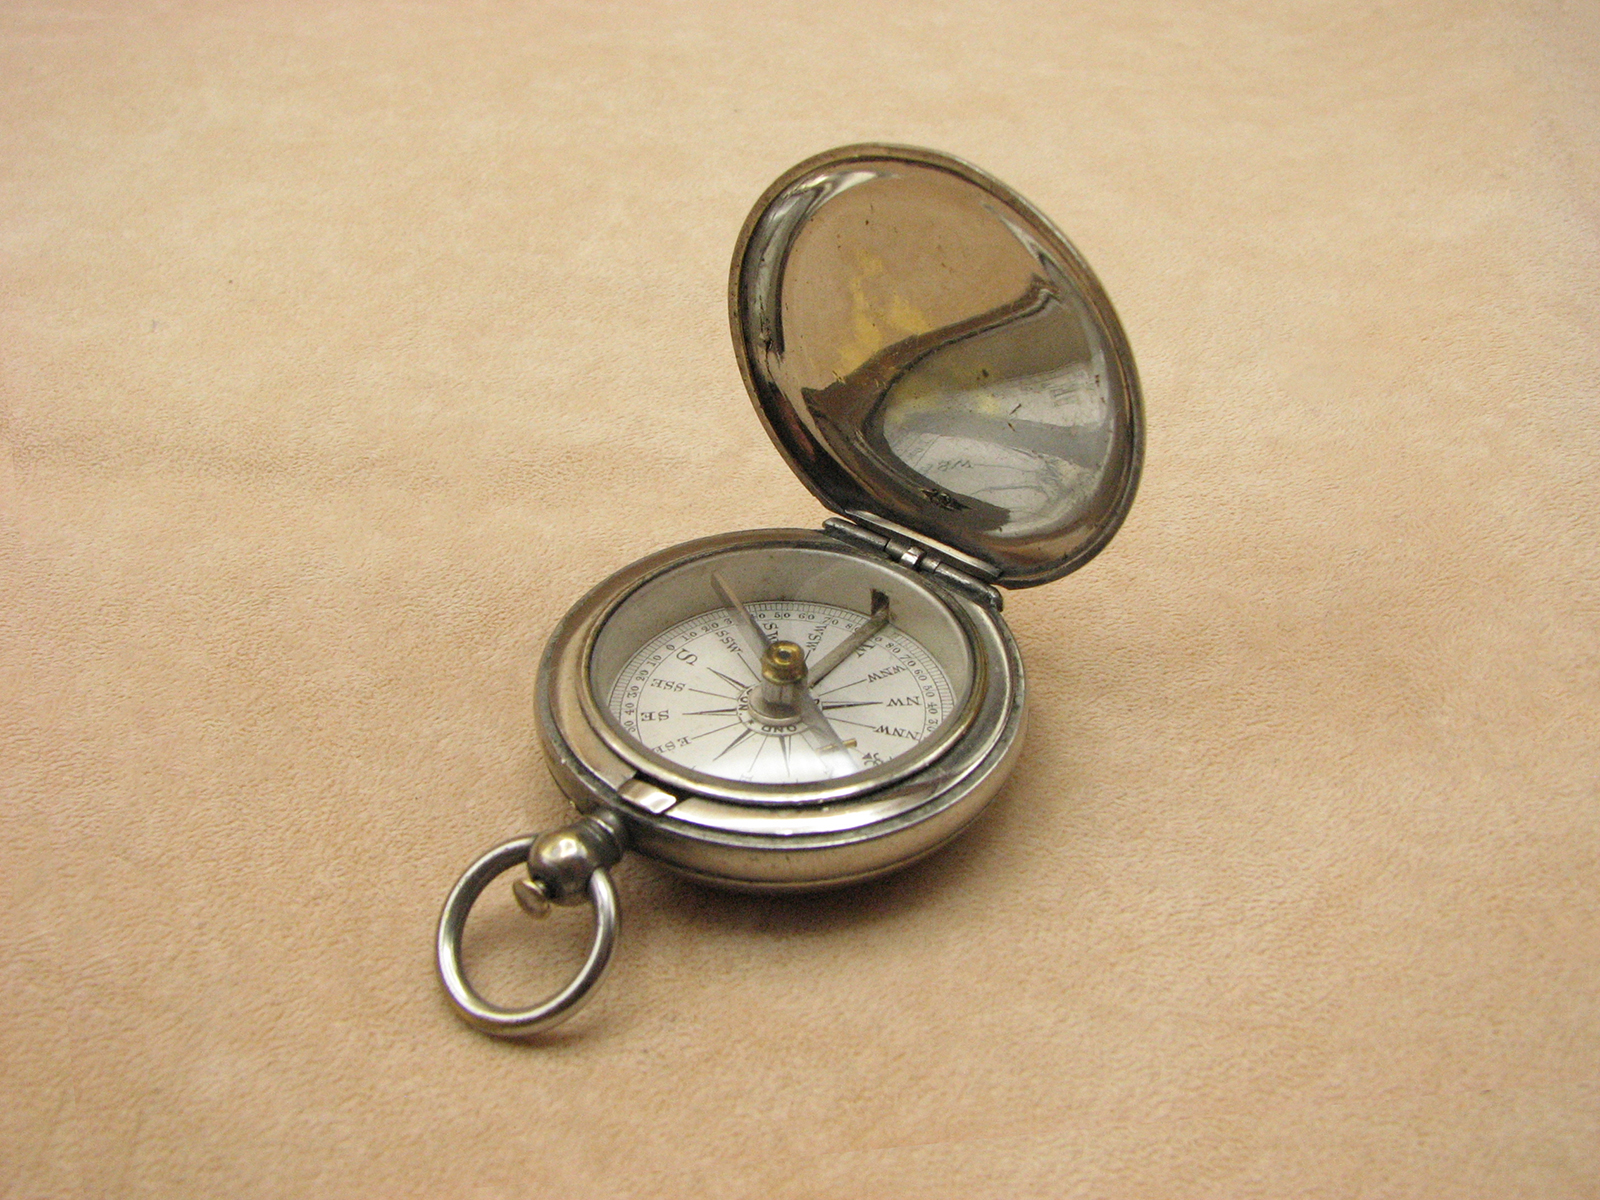 Dollond Victorian hunter cased pocket compass with gemstone needle